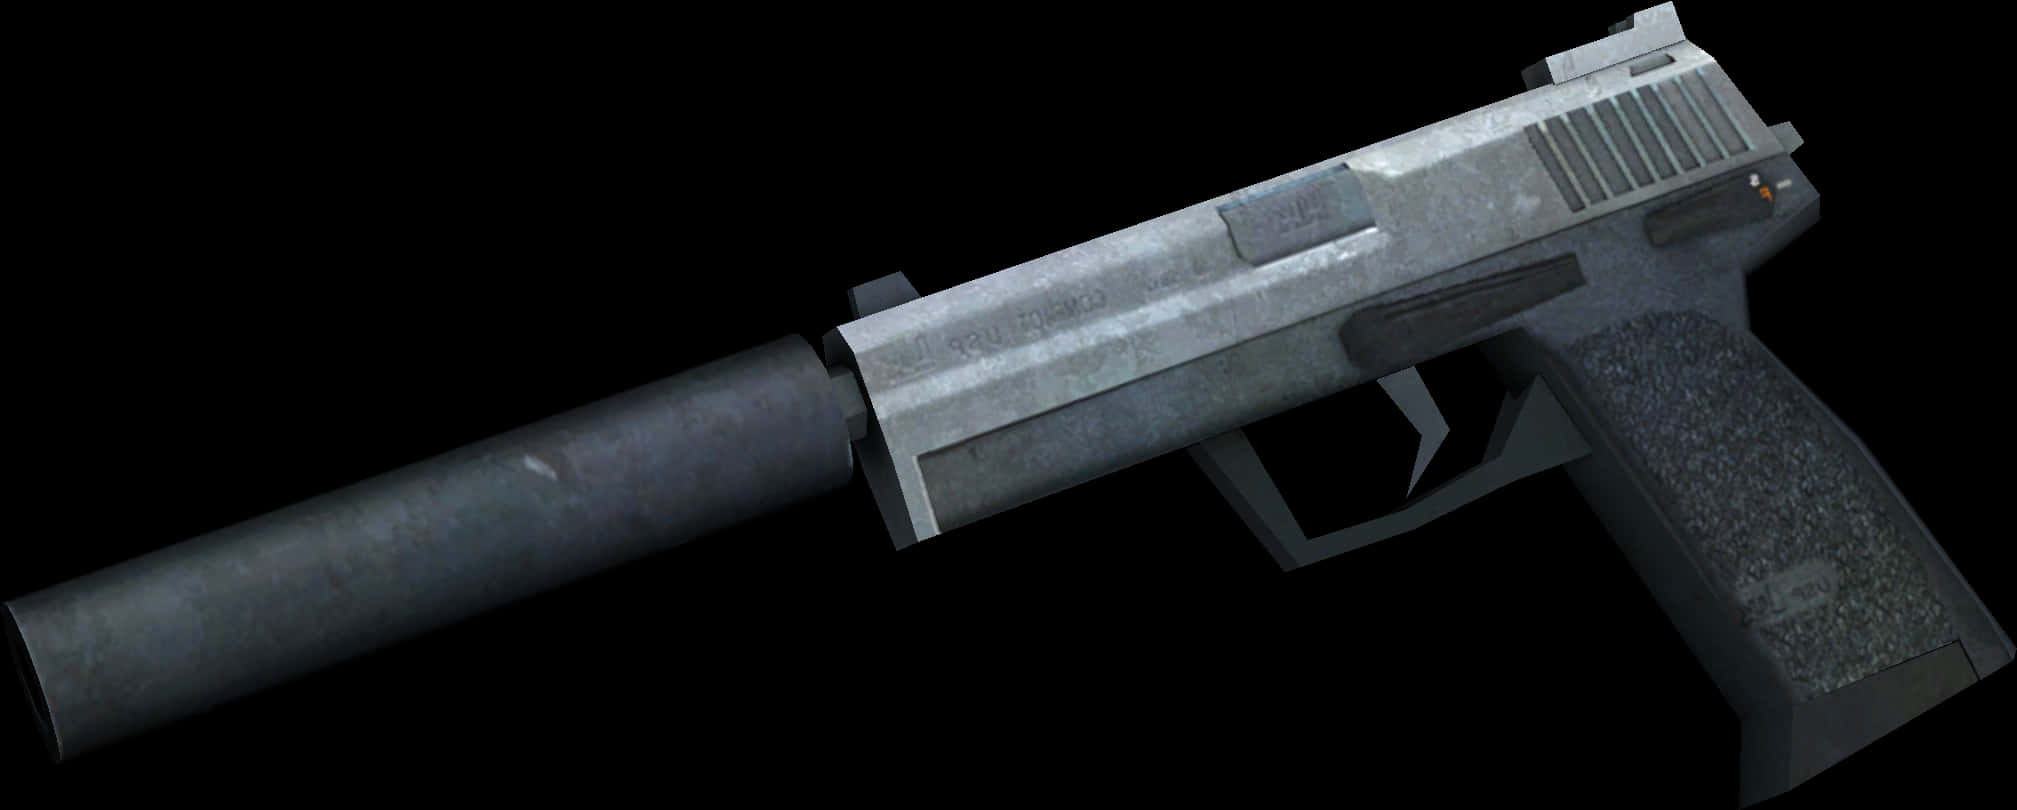 A Silver Gun With A Black Background